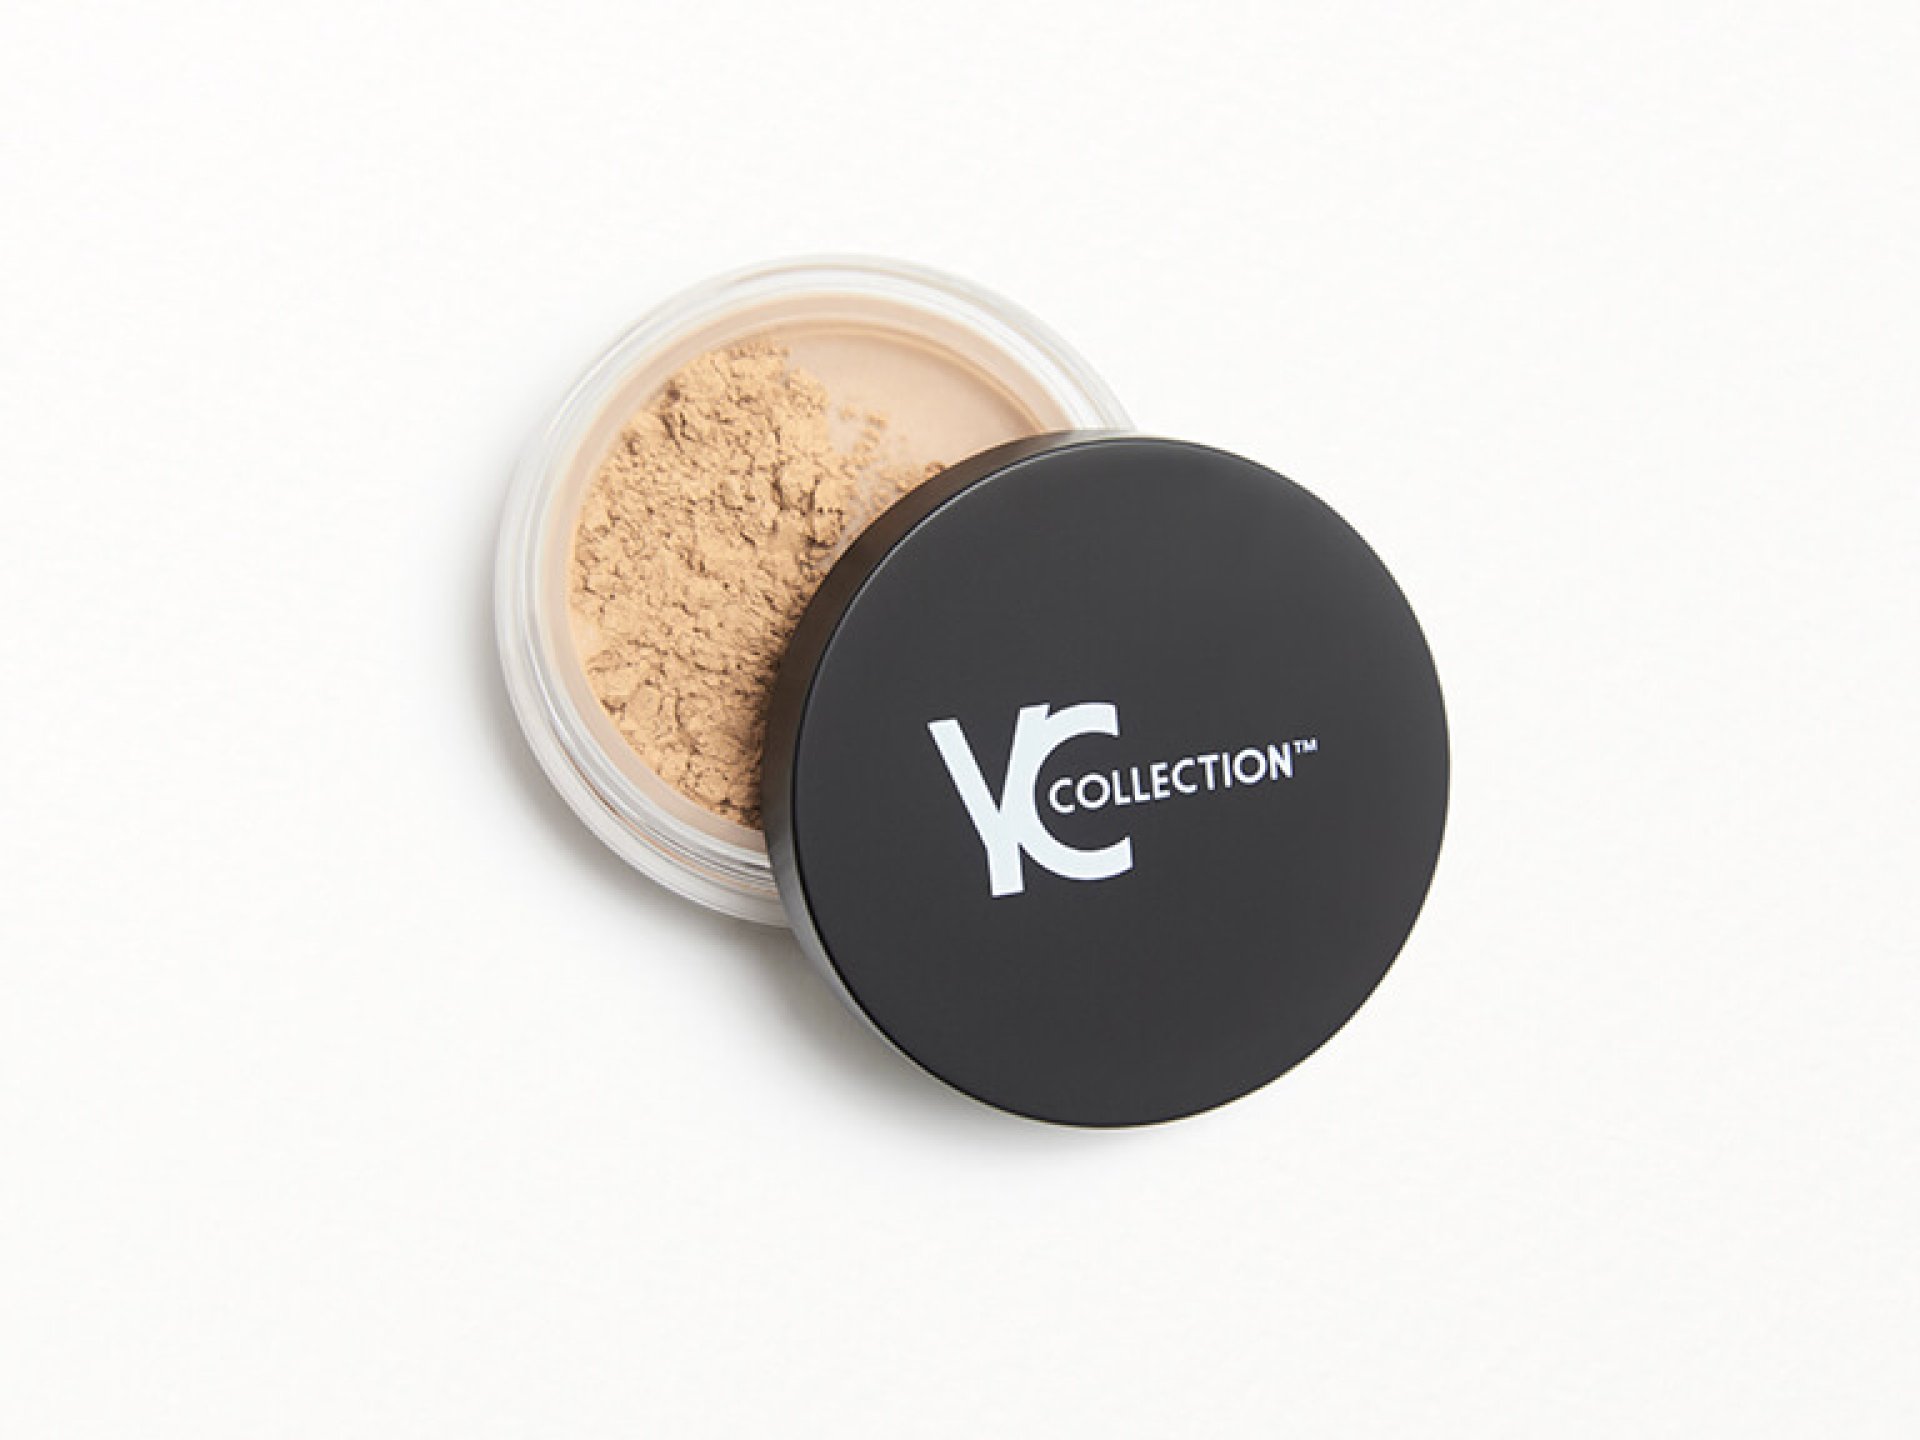 YC COLLECTION Loose Setting Powder in #213